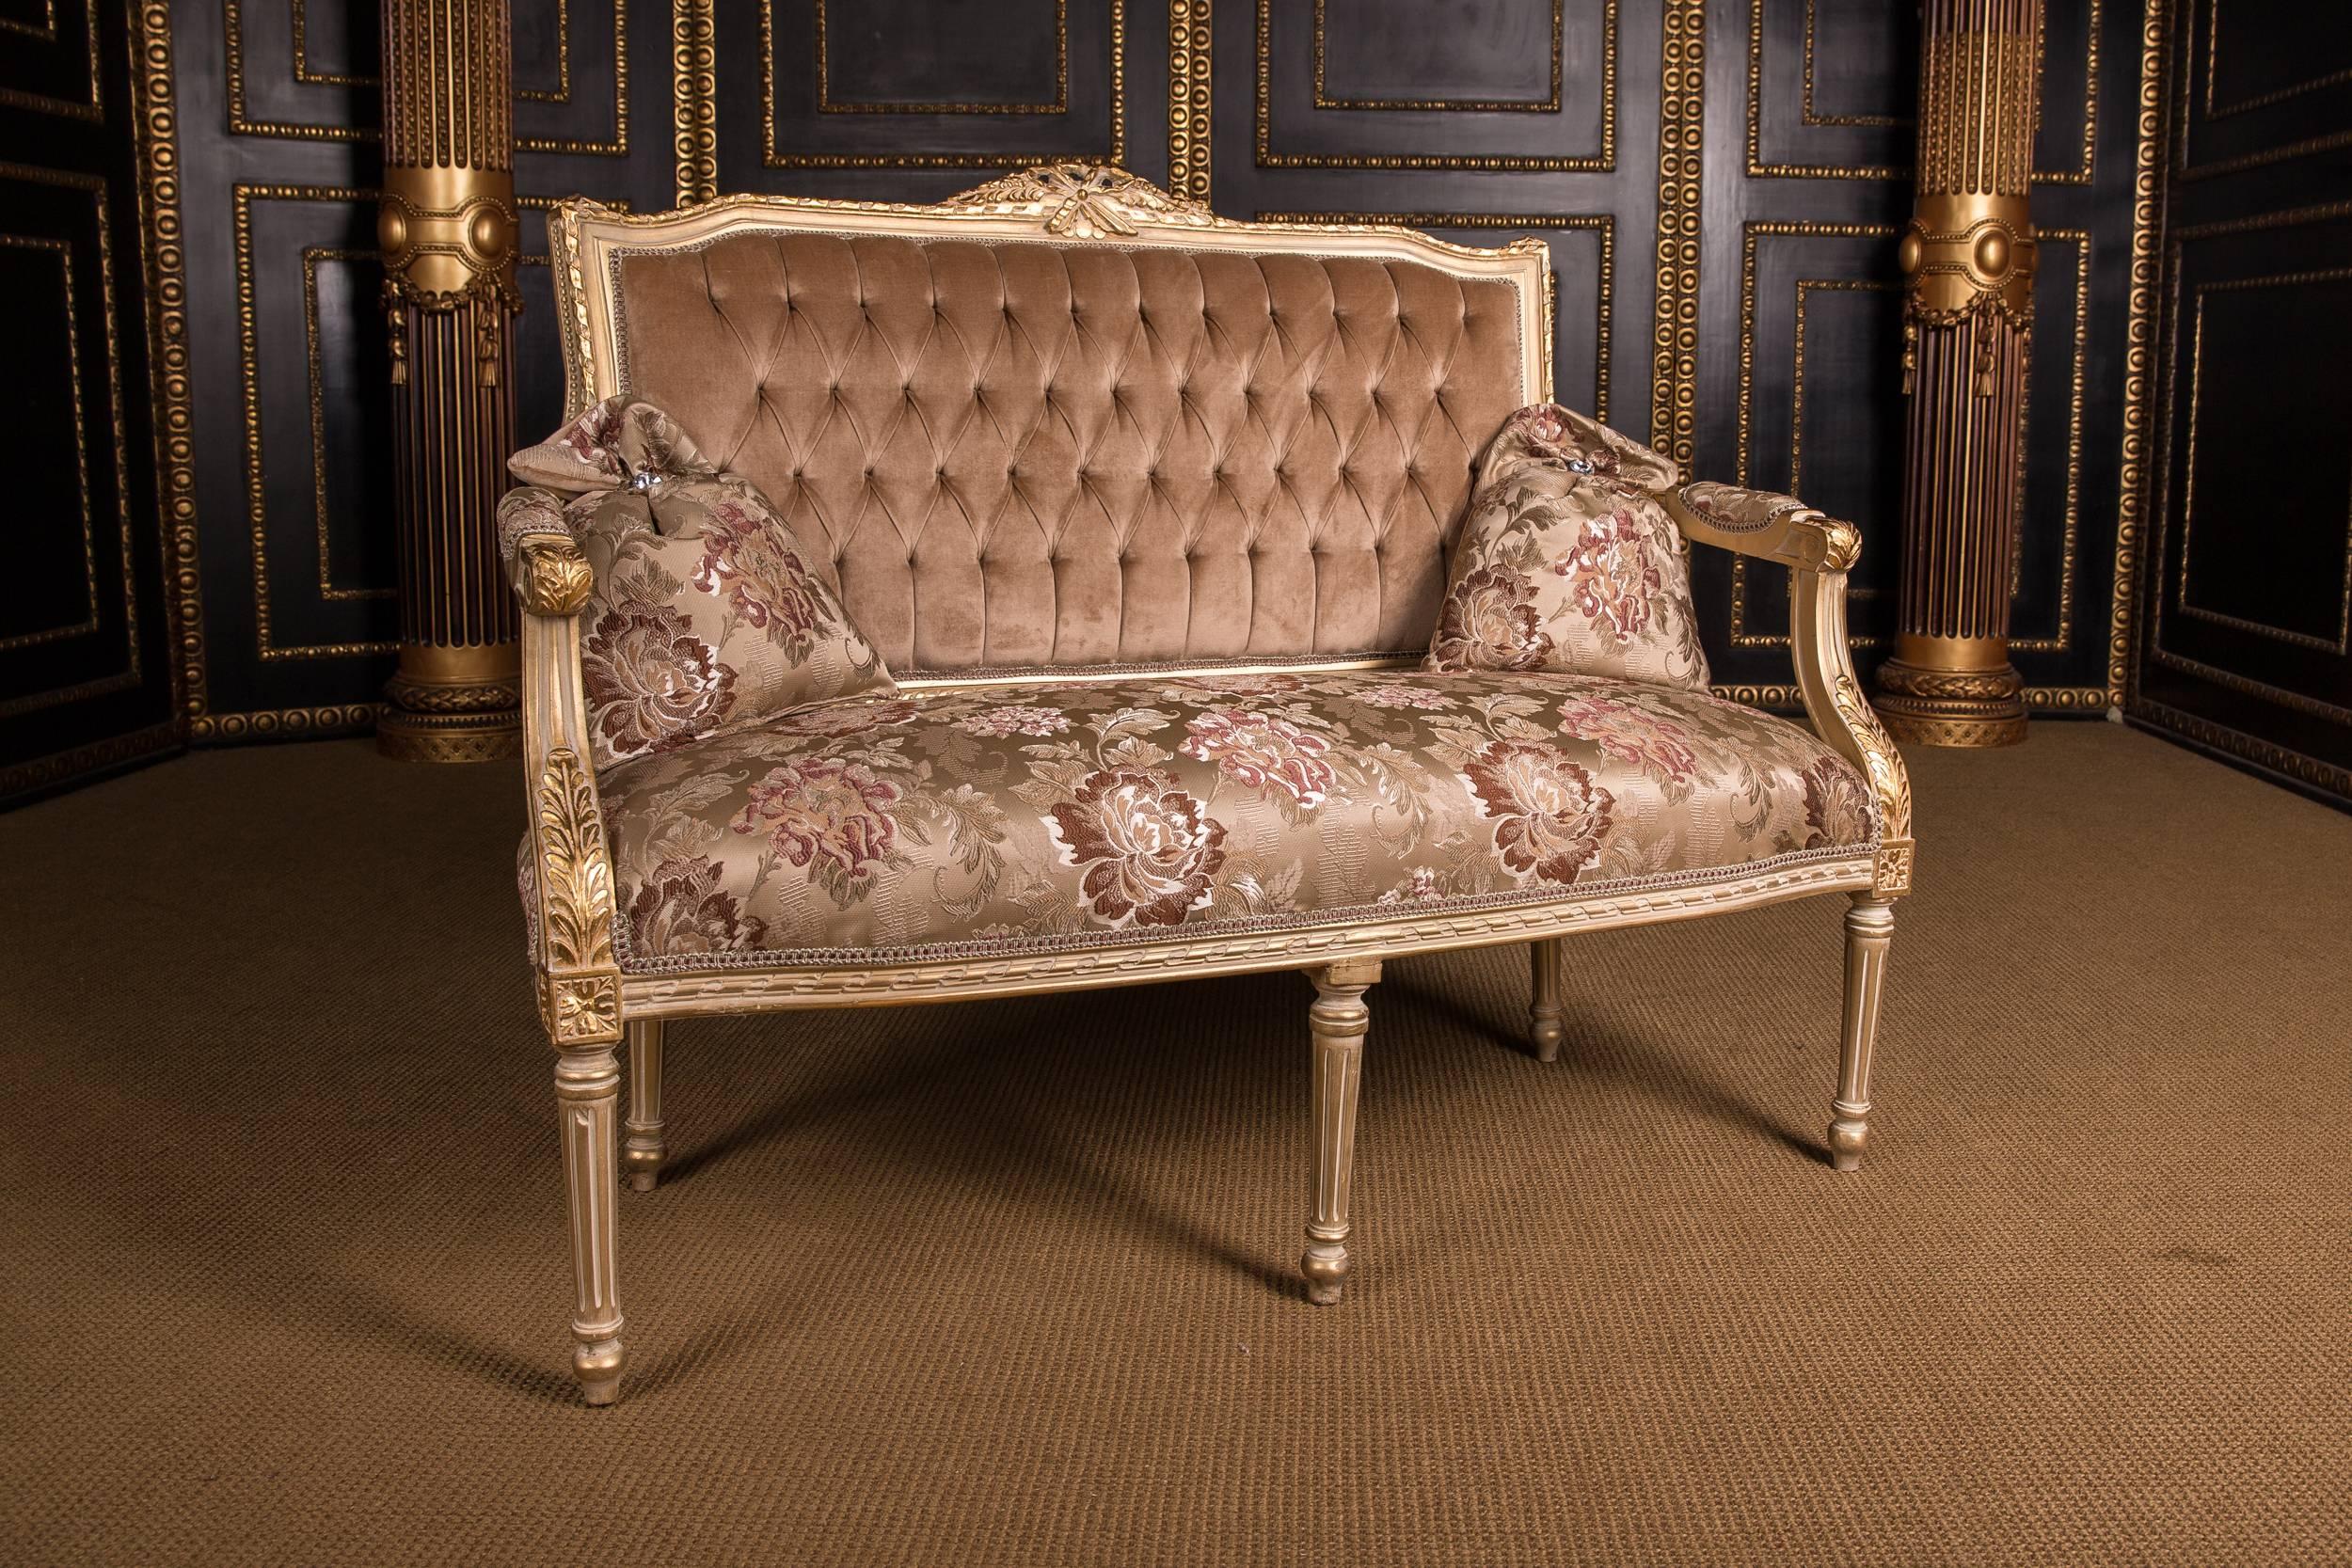 Classic French Seating Set Sofa and Two Armchairs in the Louis Seize Style (20. Jahrhundert)